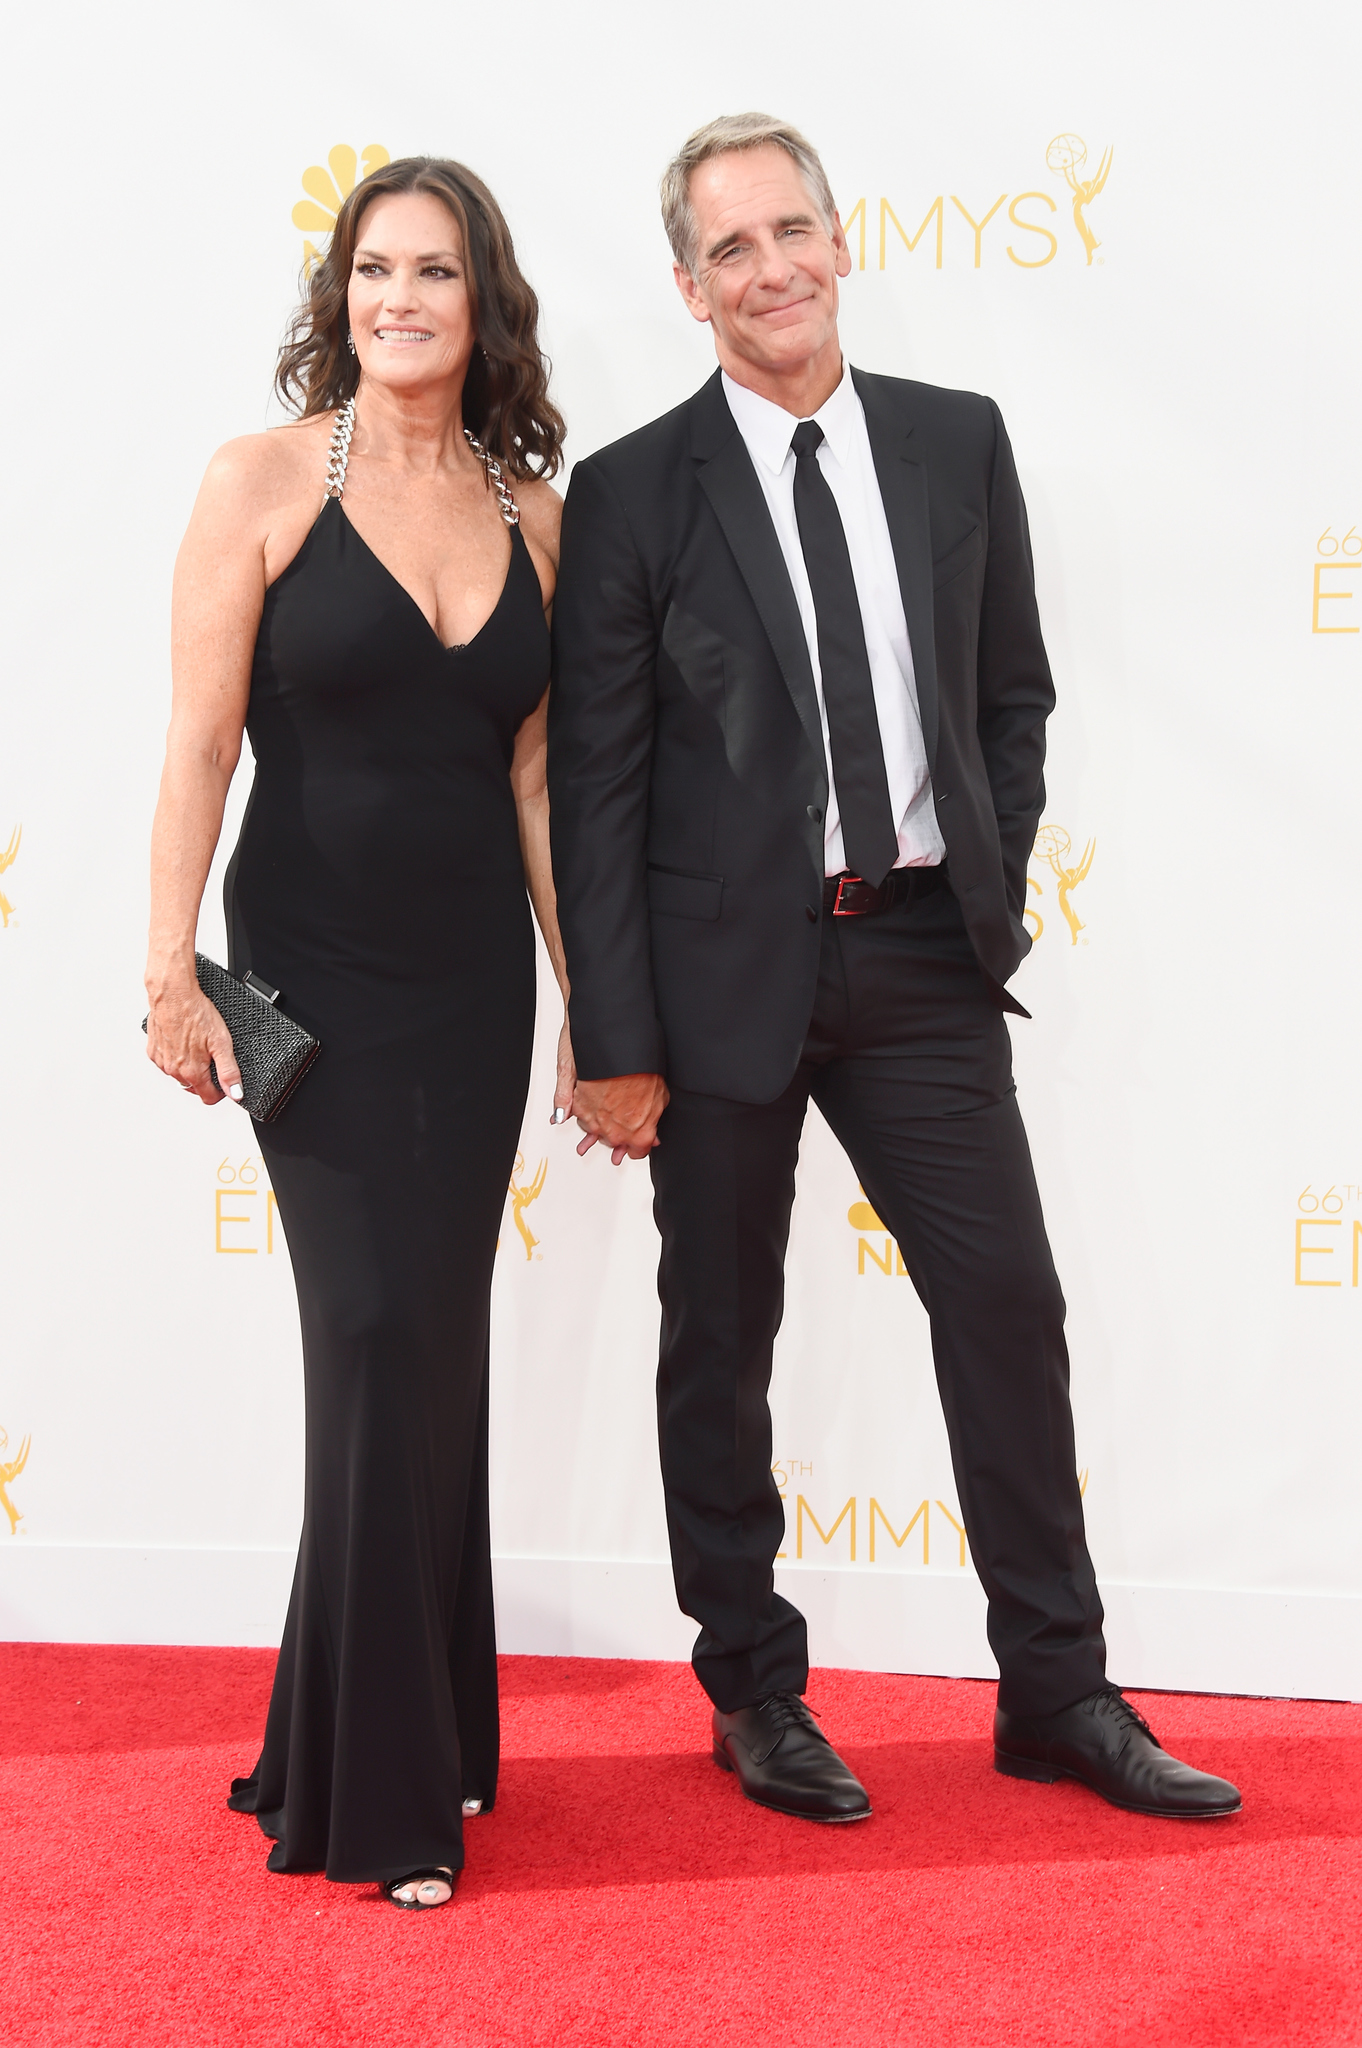 Scott Bakula and Chelsea Field at event of The 66th Primetime Emmy Awards (2014)